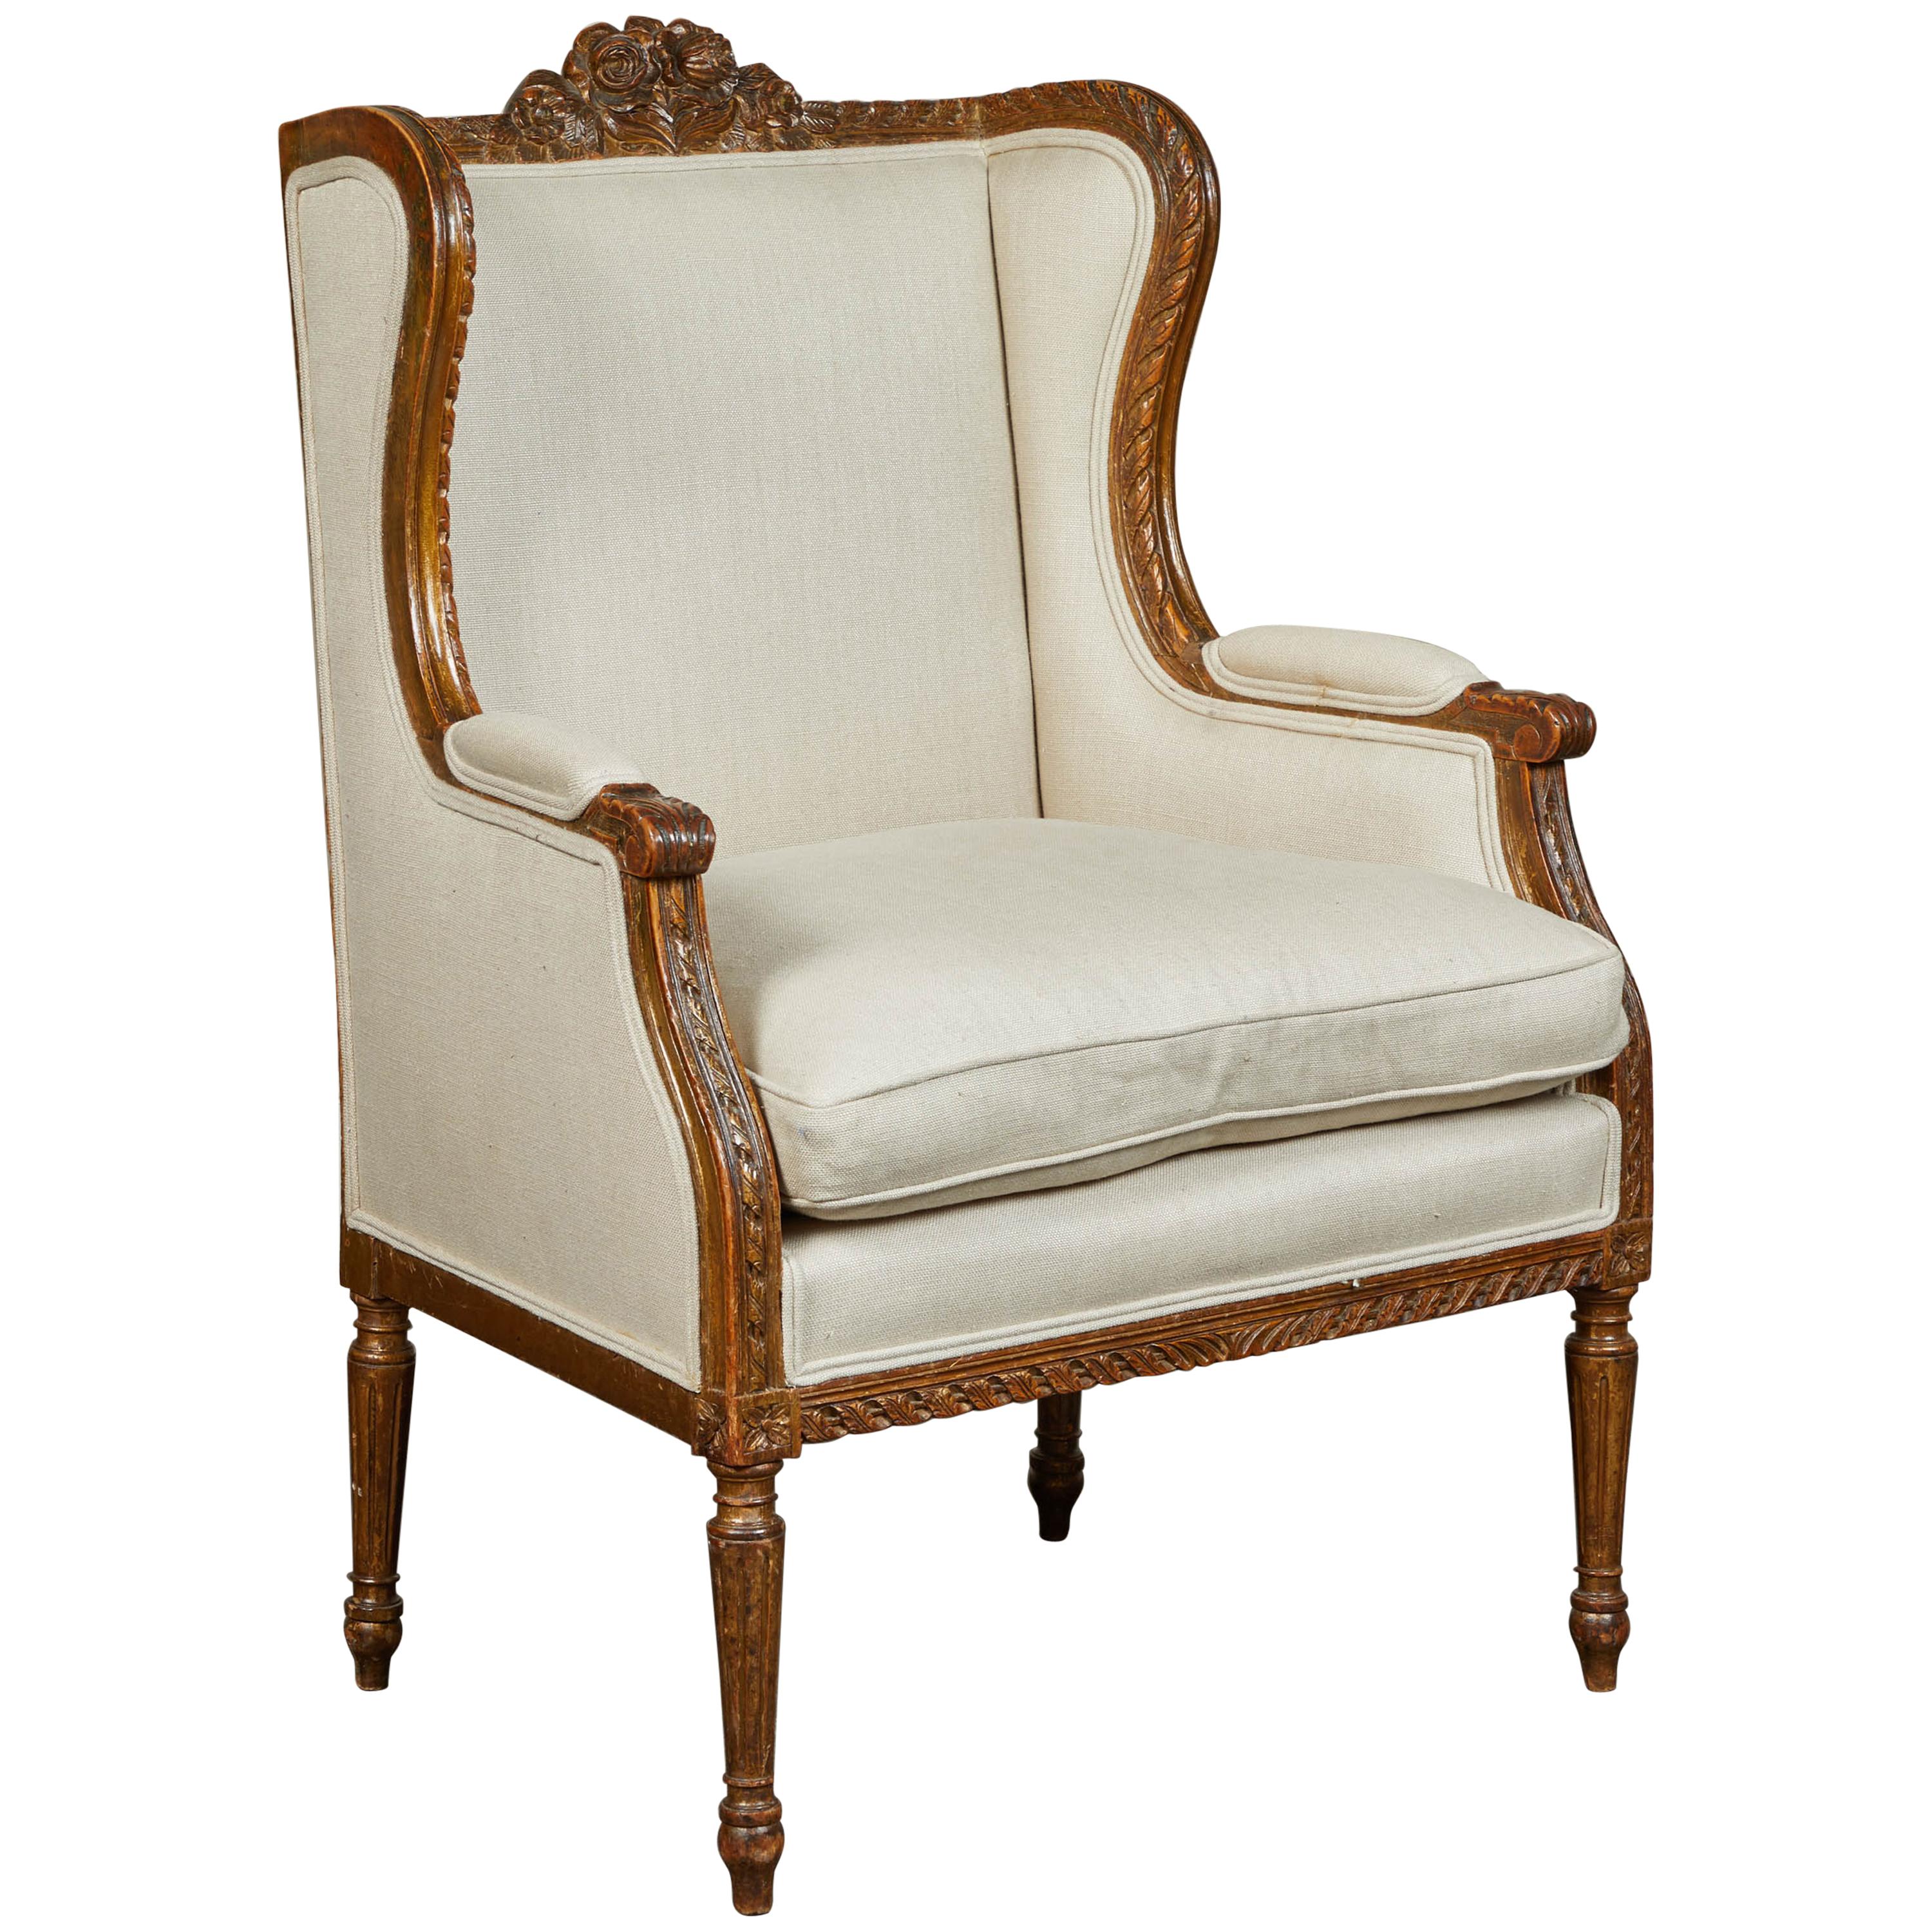 19th Century French Wing Back Chair